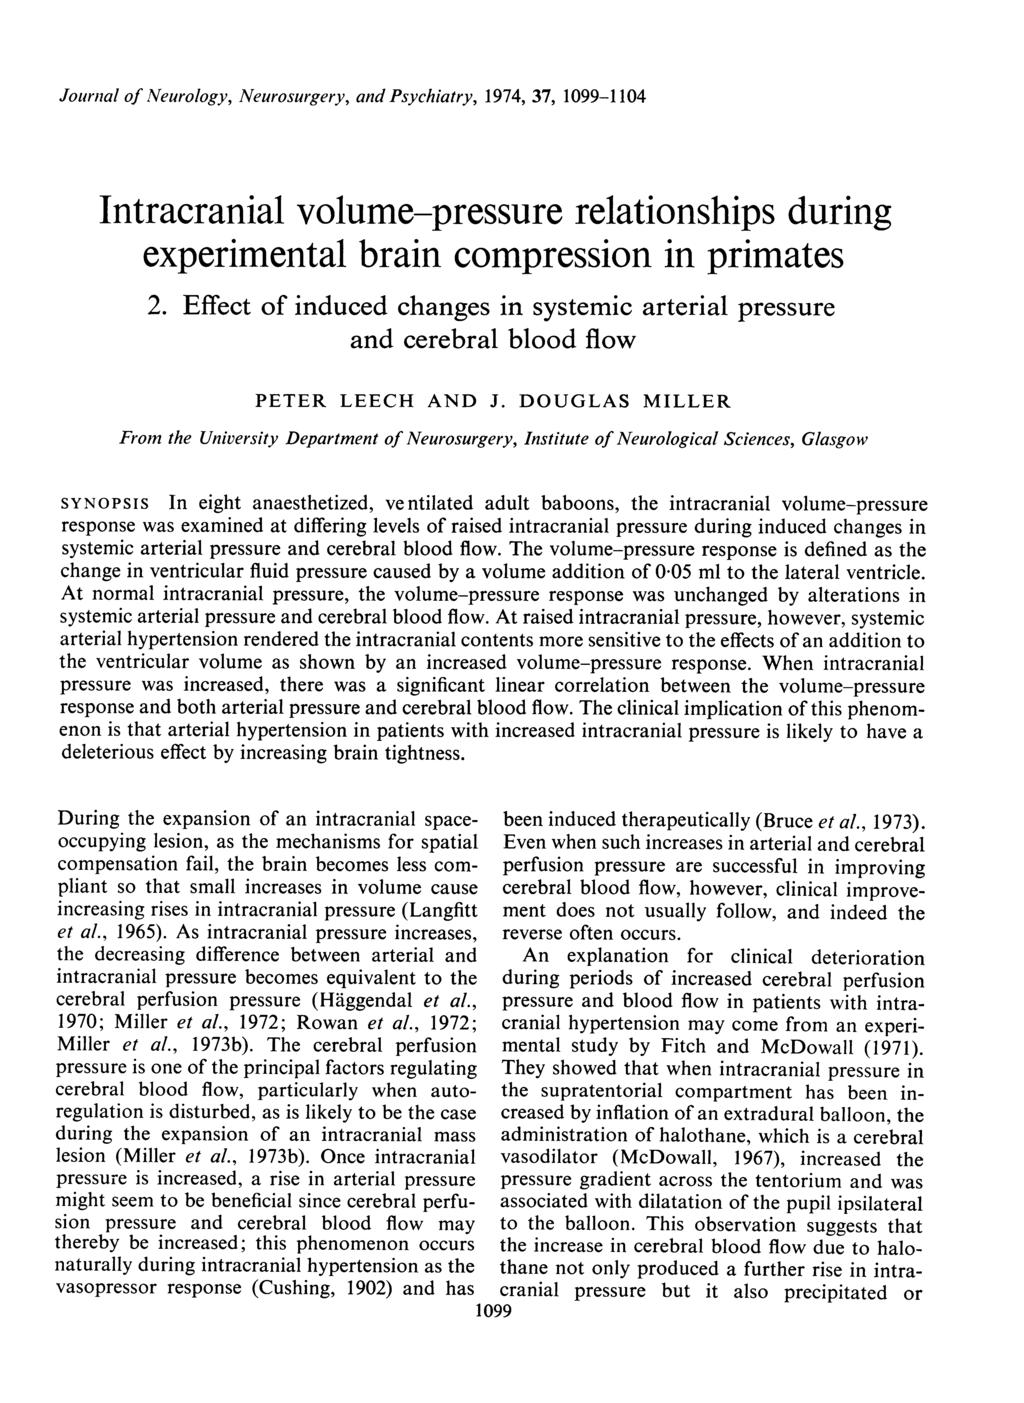 Journial of Neurology, Neurosurgery, and Psychiatry, 1974, 37, 1099-1104 Intracranial volume-pressure relationships during experimental brain compression in primates 2.